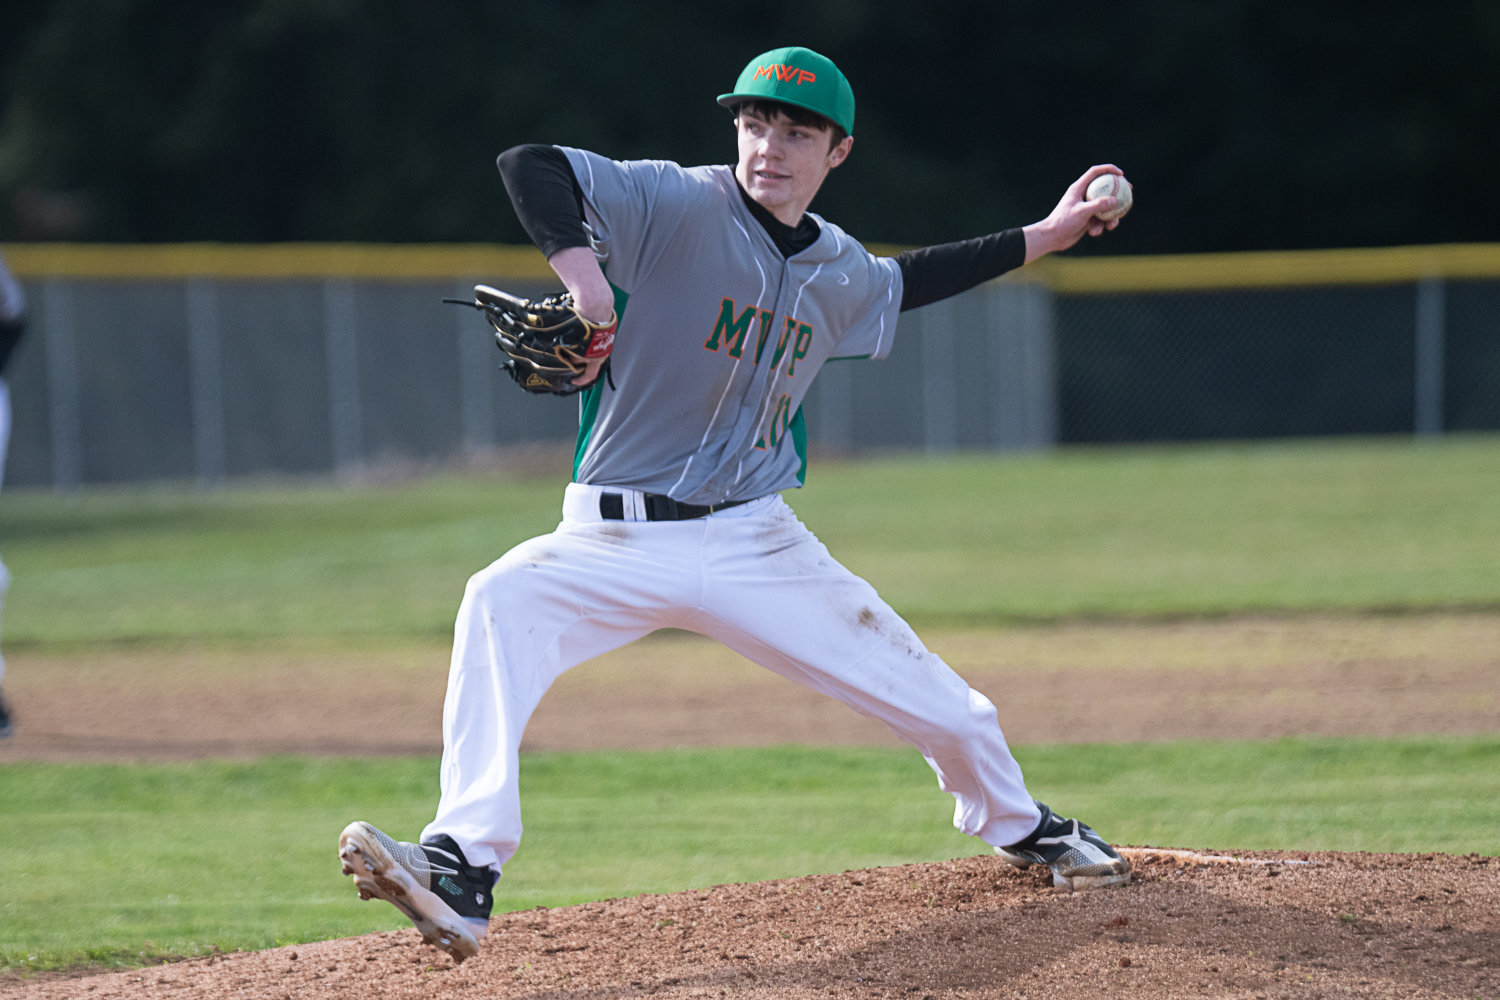 Keaton Thompson fires a pitch during MWP's first game against Winlock on March 27.